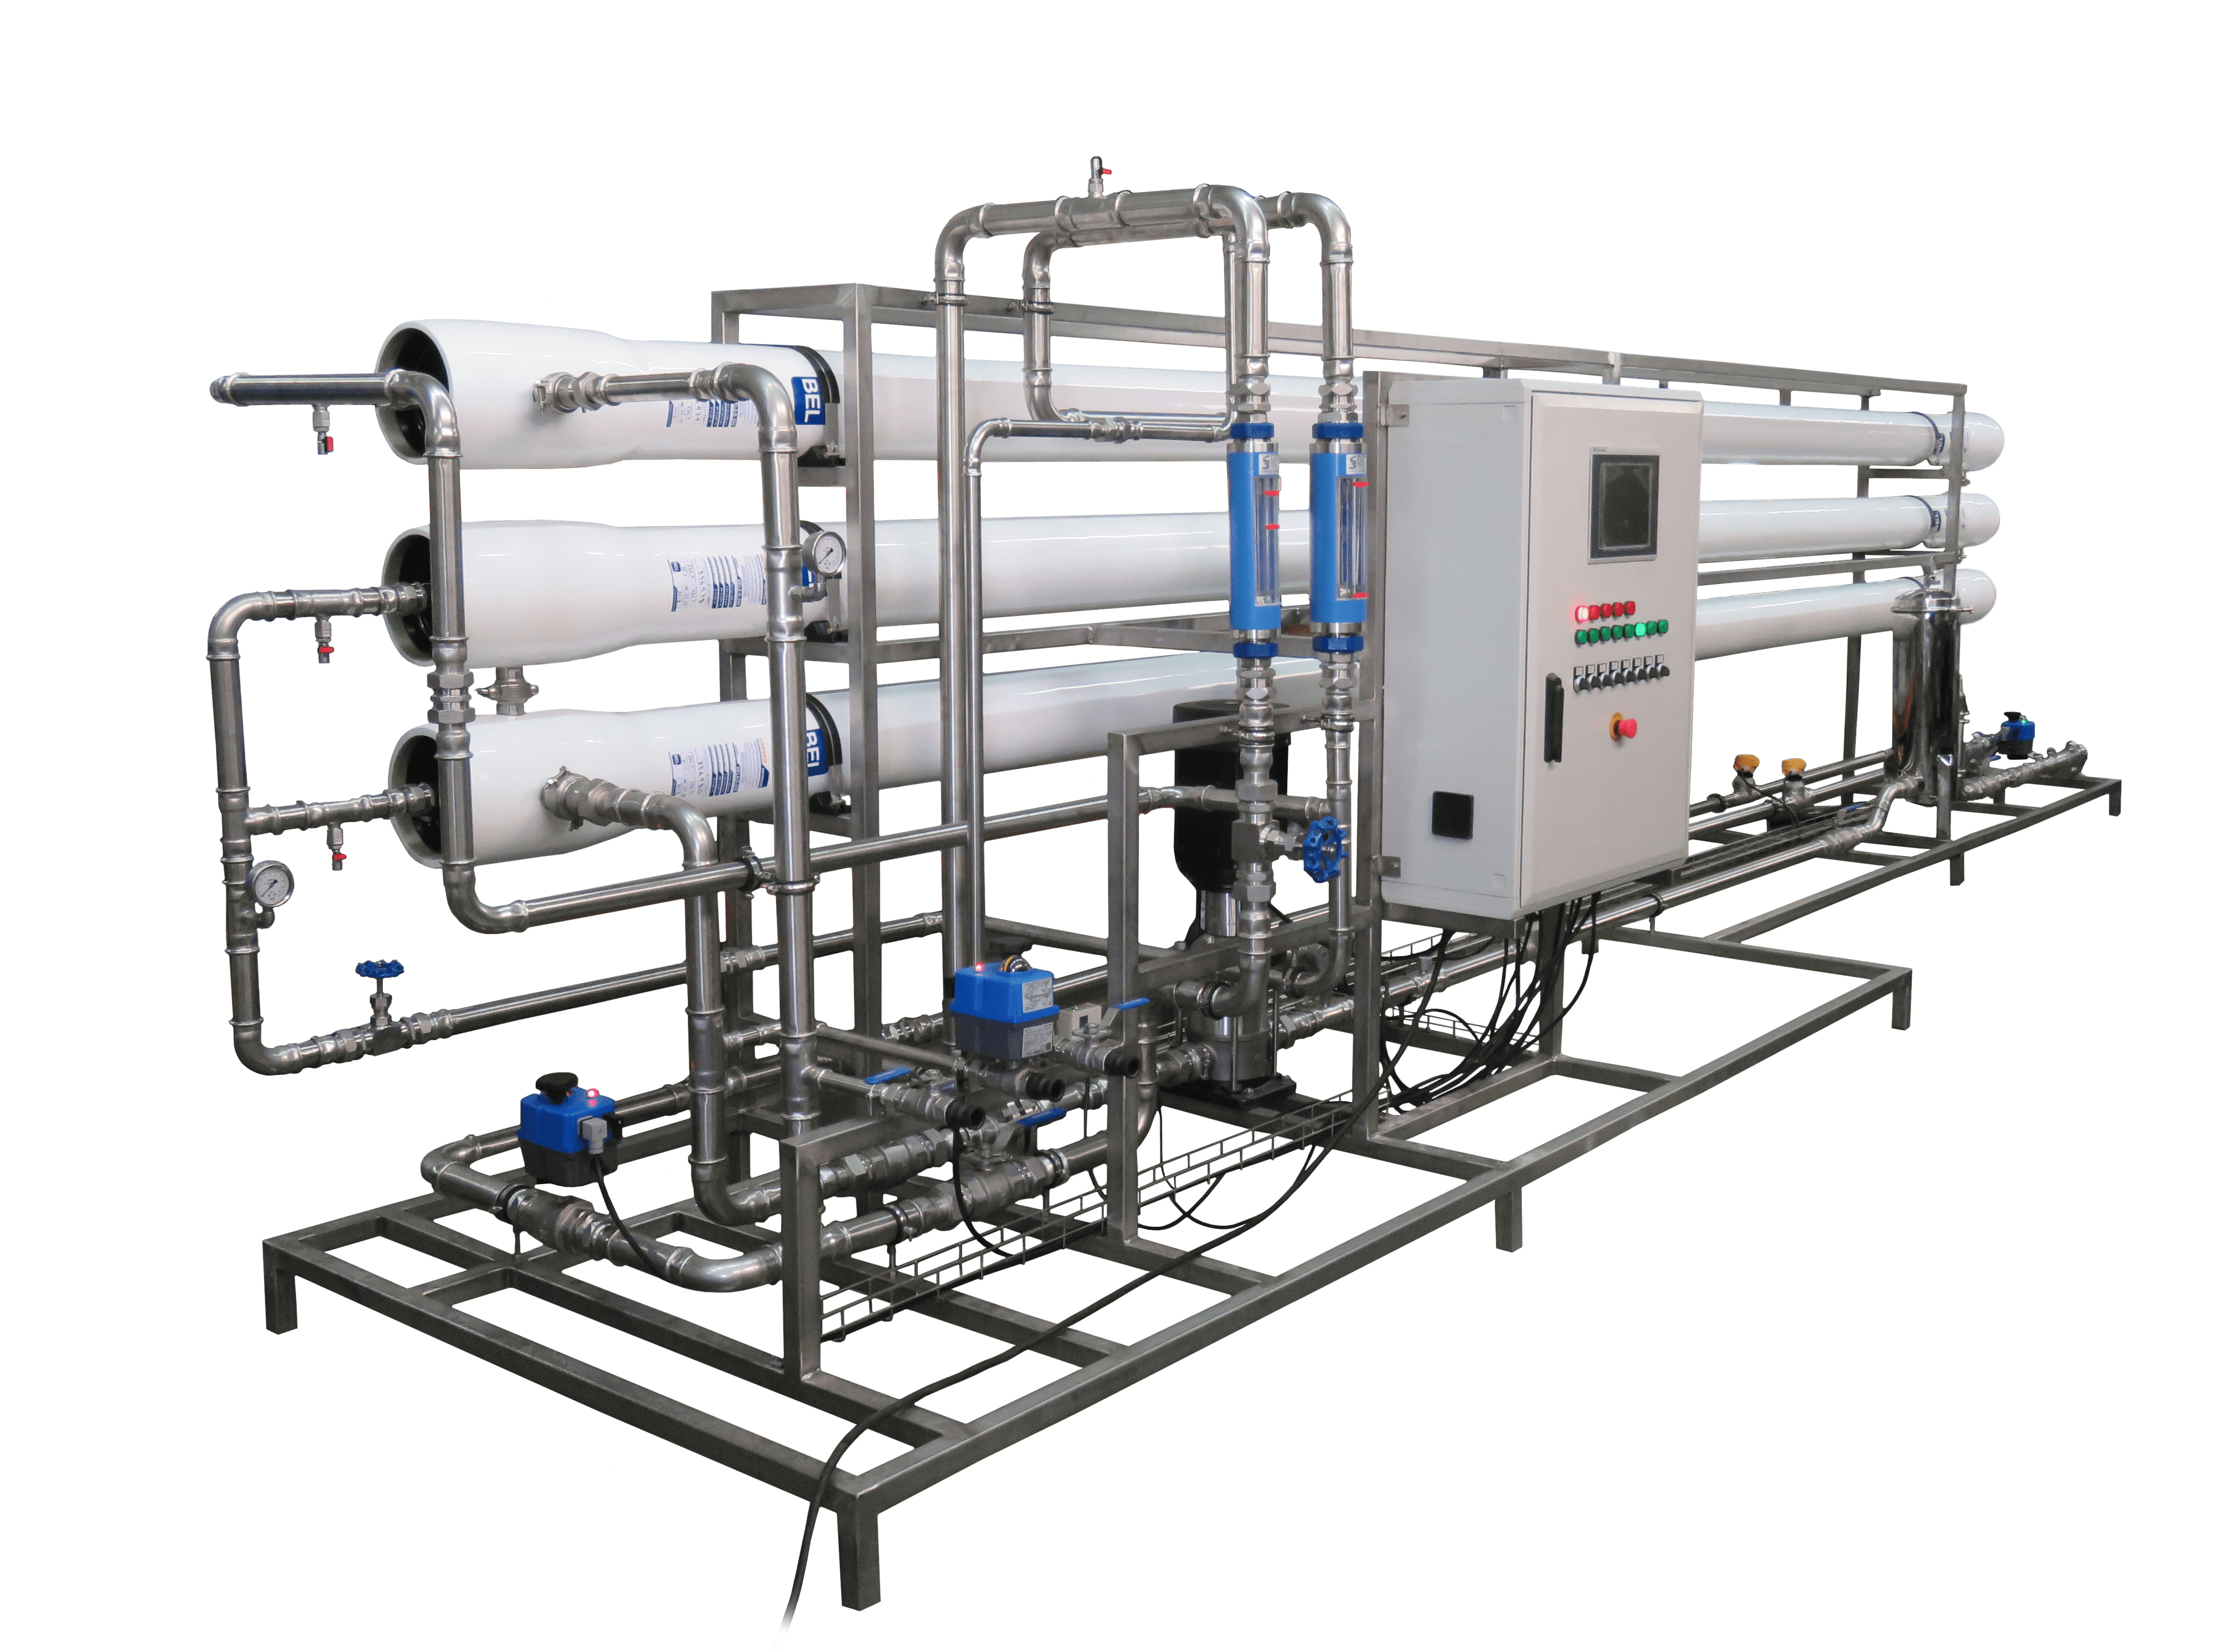 Water treatment for the company Aguas Mexico – Dominican Republic